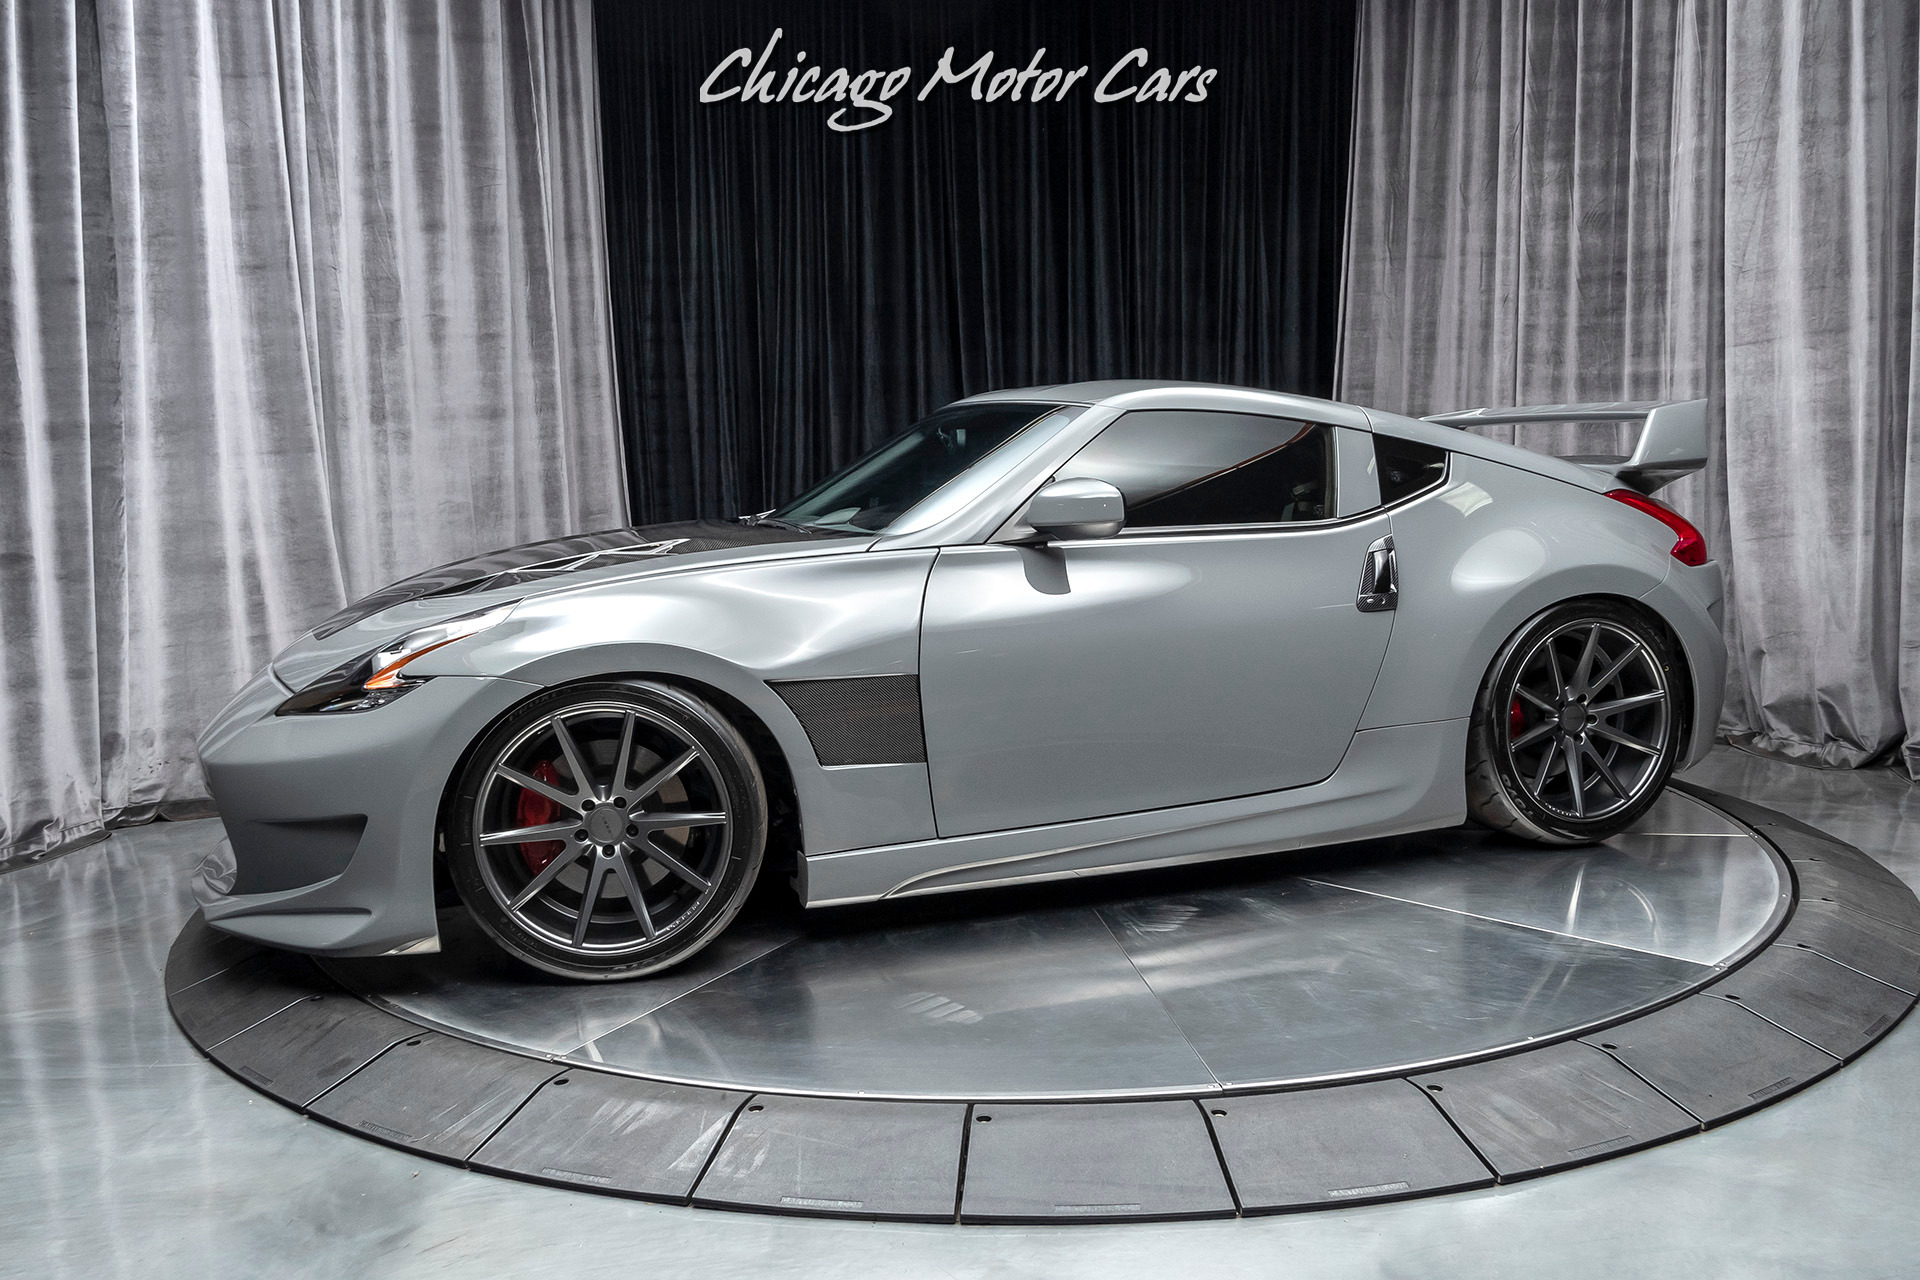 Used 2016 Nissan 370Z NISMO - TWIN TURBO 800HP! - $75K IN UPGRADES 